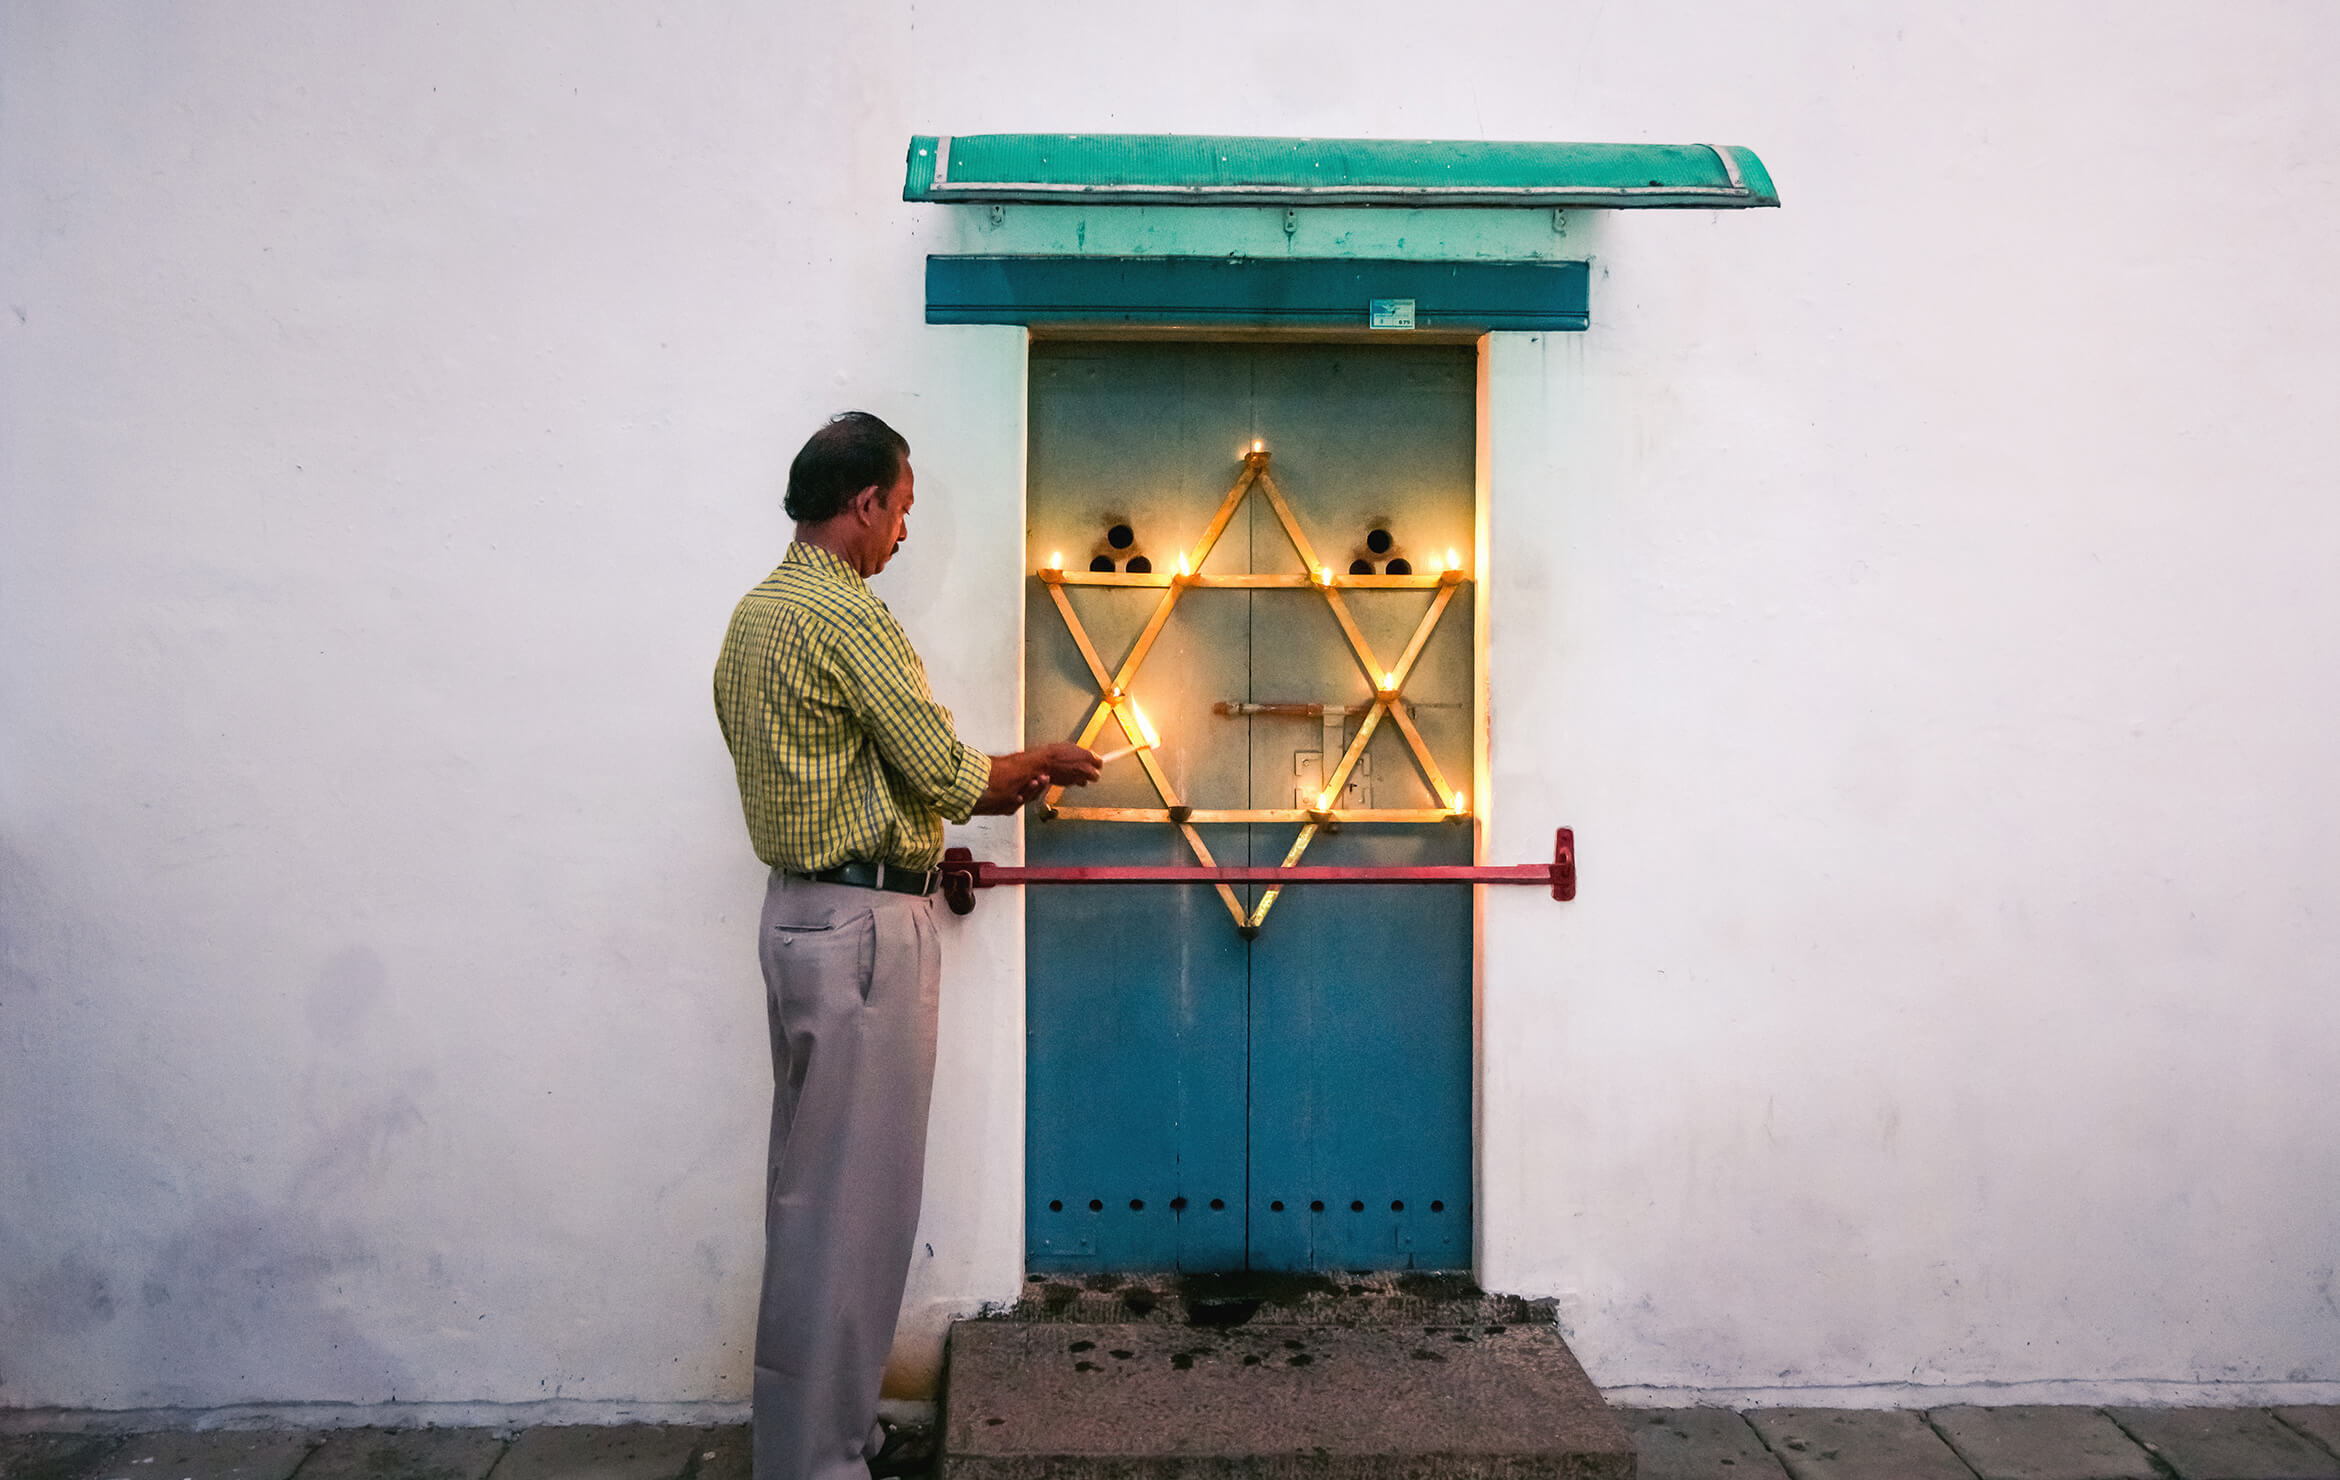 A JEWISH AUTUMN IN KOCHI -A much smaller candelabrum, shaped like the Star of David and mounted on a tiny door at the foot of the clock tower of the synagogue, is also lit.